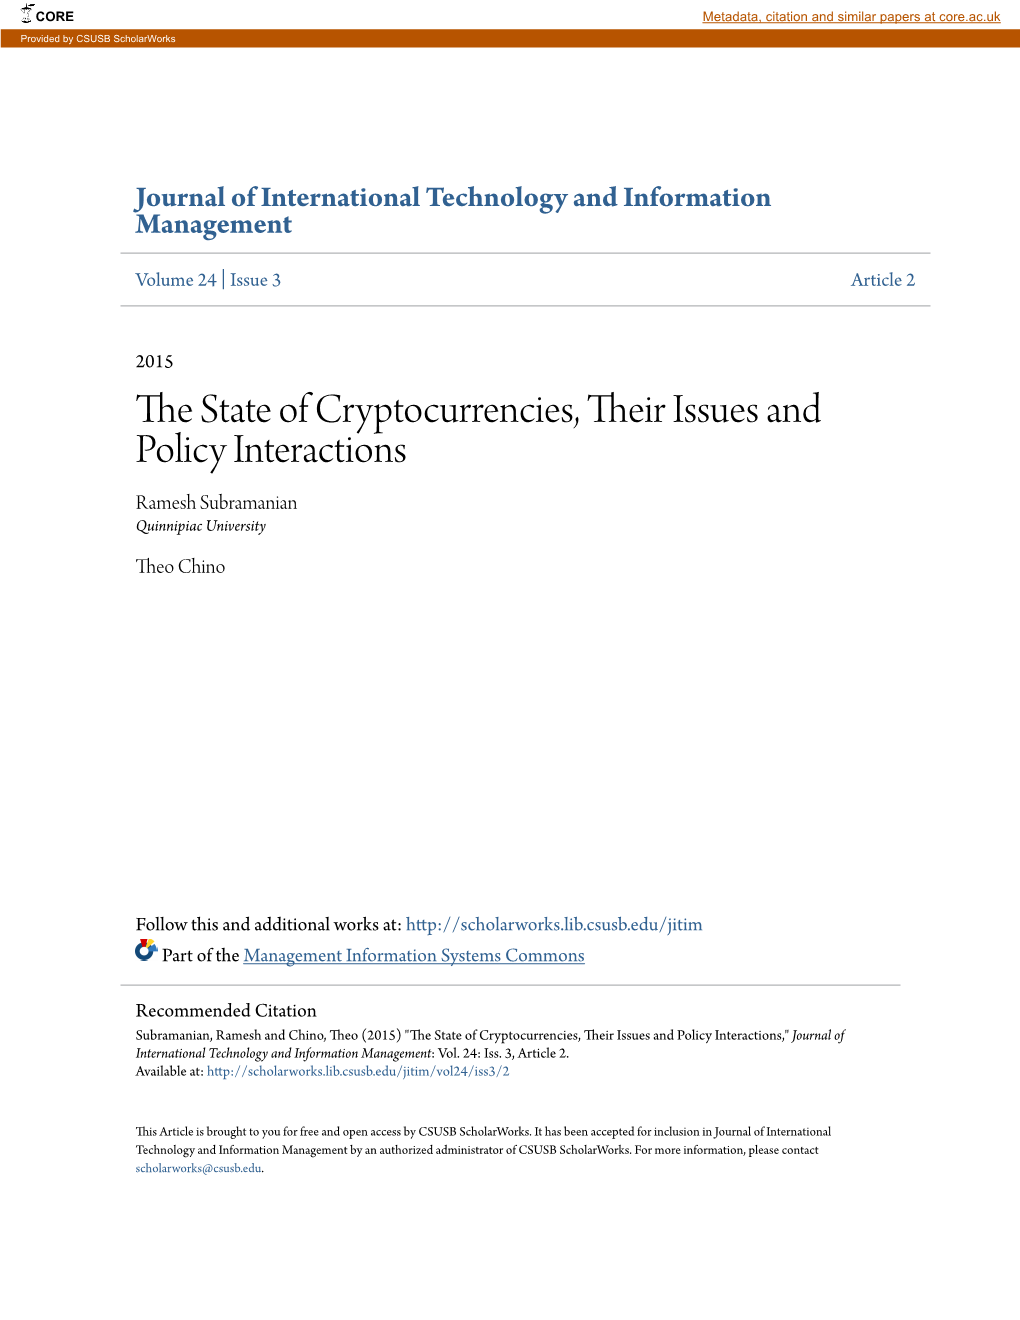 The State of Cryptocurrencies, Their Issues and Policy Interactions